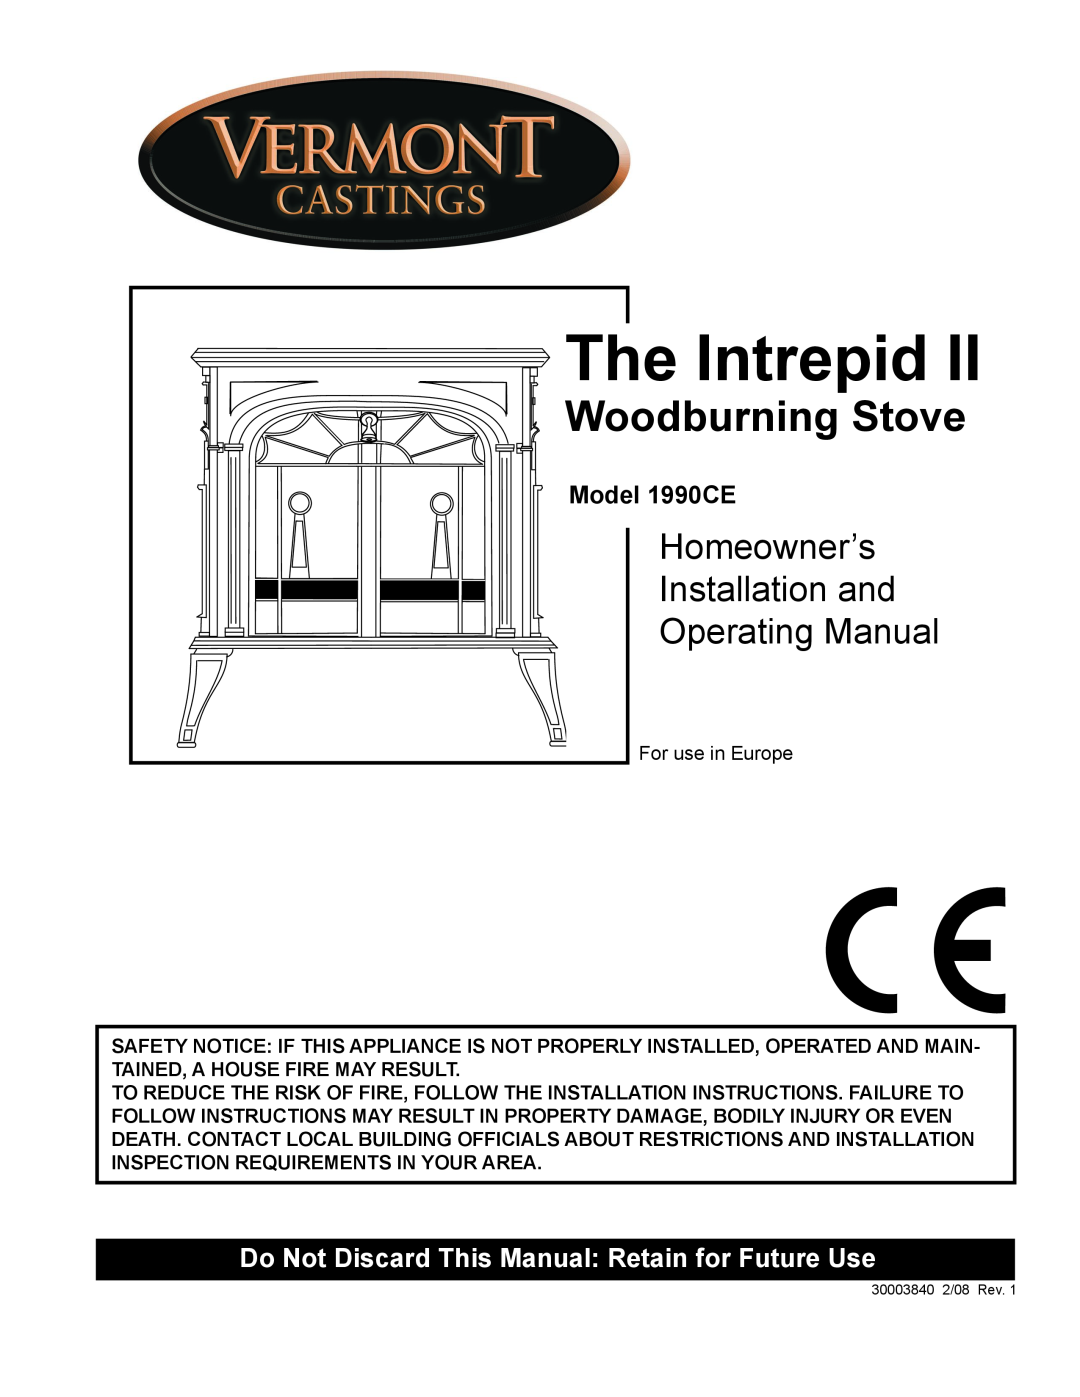 Vermont Casting installation instructions Woodburning Stove, Model 1990CE, The Intrepid 